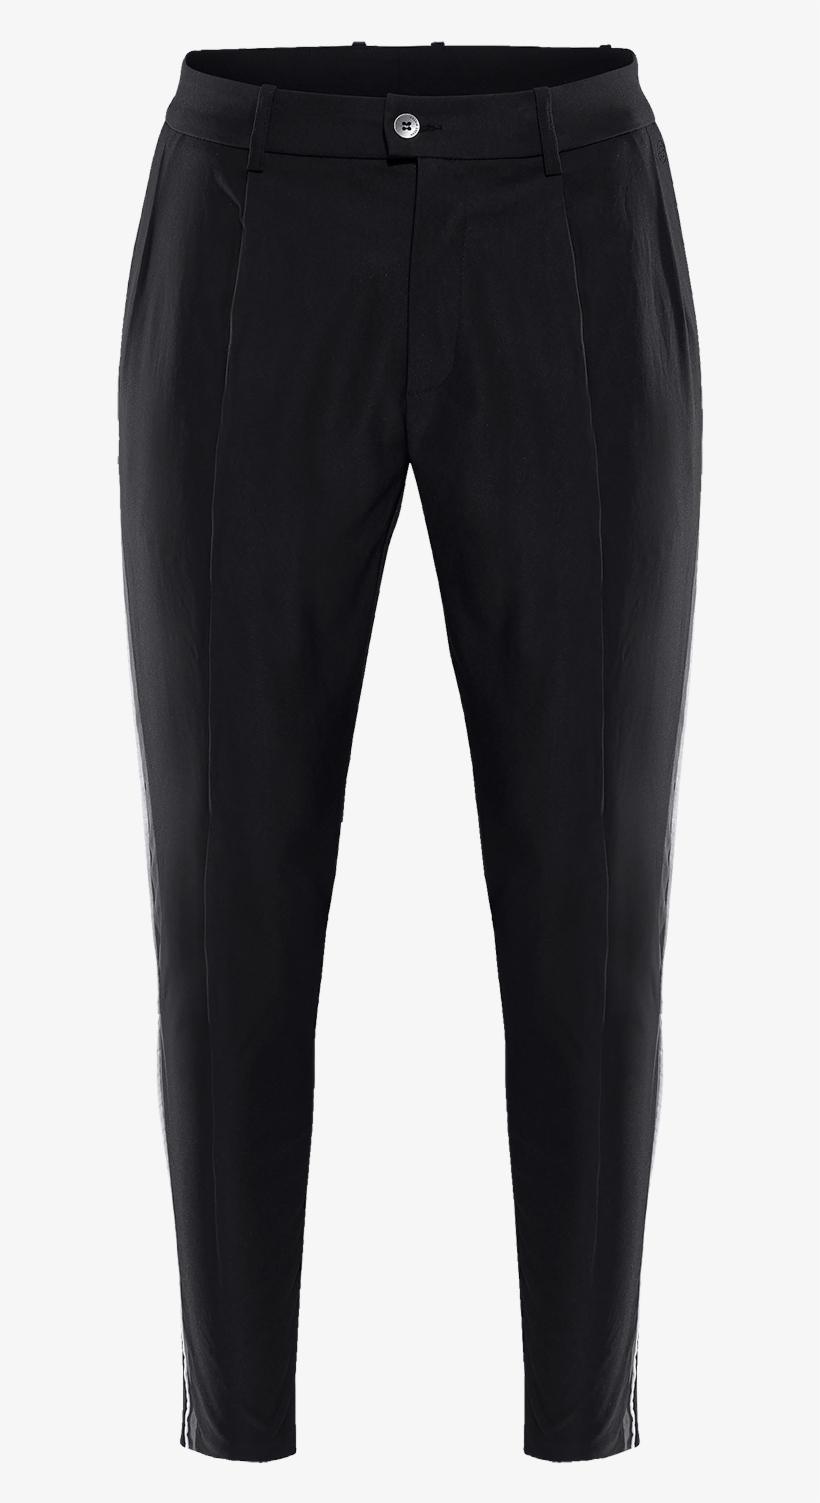 E-black Trousers - Vaude Wintry Pants Iii, transparent png #5912121